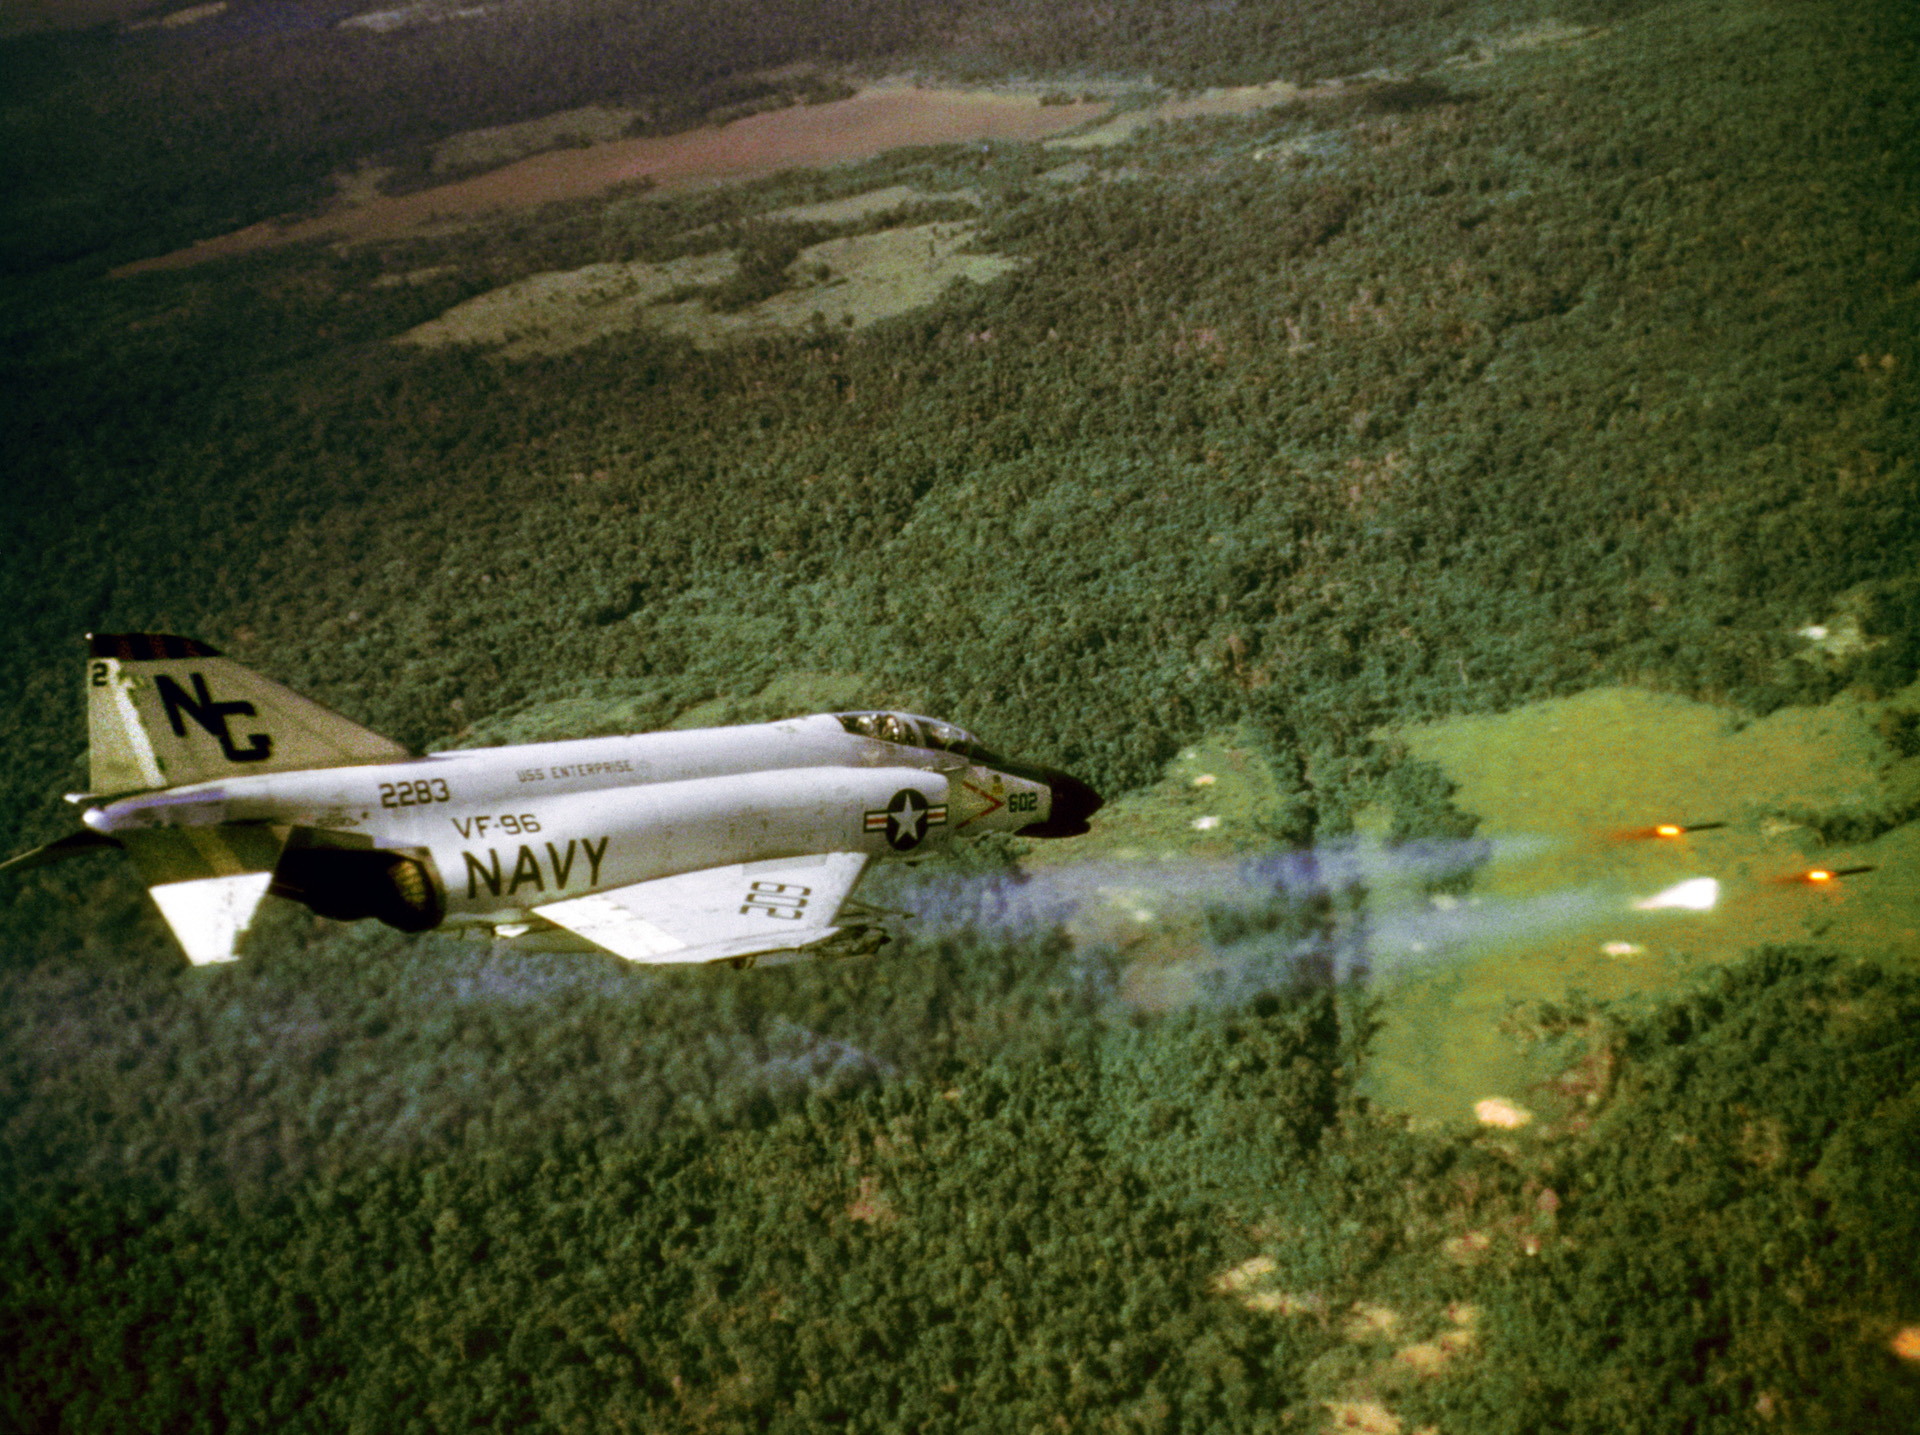 Navy airmen flew missions over North Vietnam with the two-seat F-4B, F4J, and RF-4B, while Air Force pilots flew missions with the F4-C, F-4D, and RF-4C. While the pilot in the front seat flew the plane, the weapons-system officer in the backseat handled navigation, radar, and weapons.